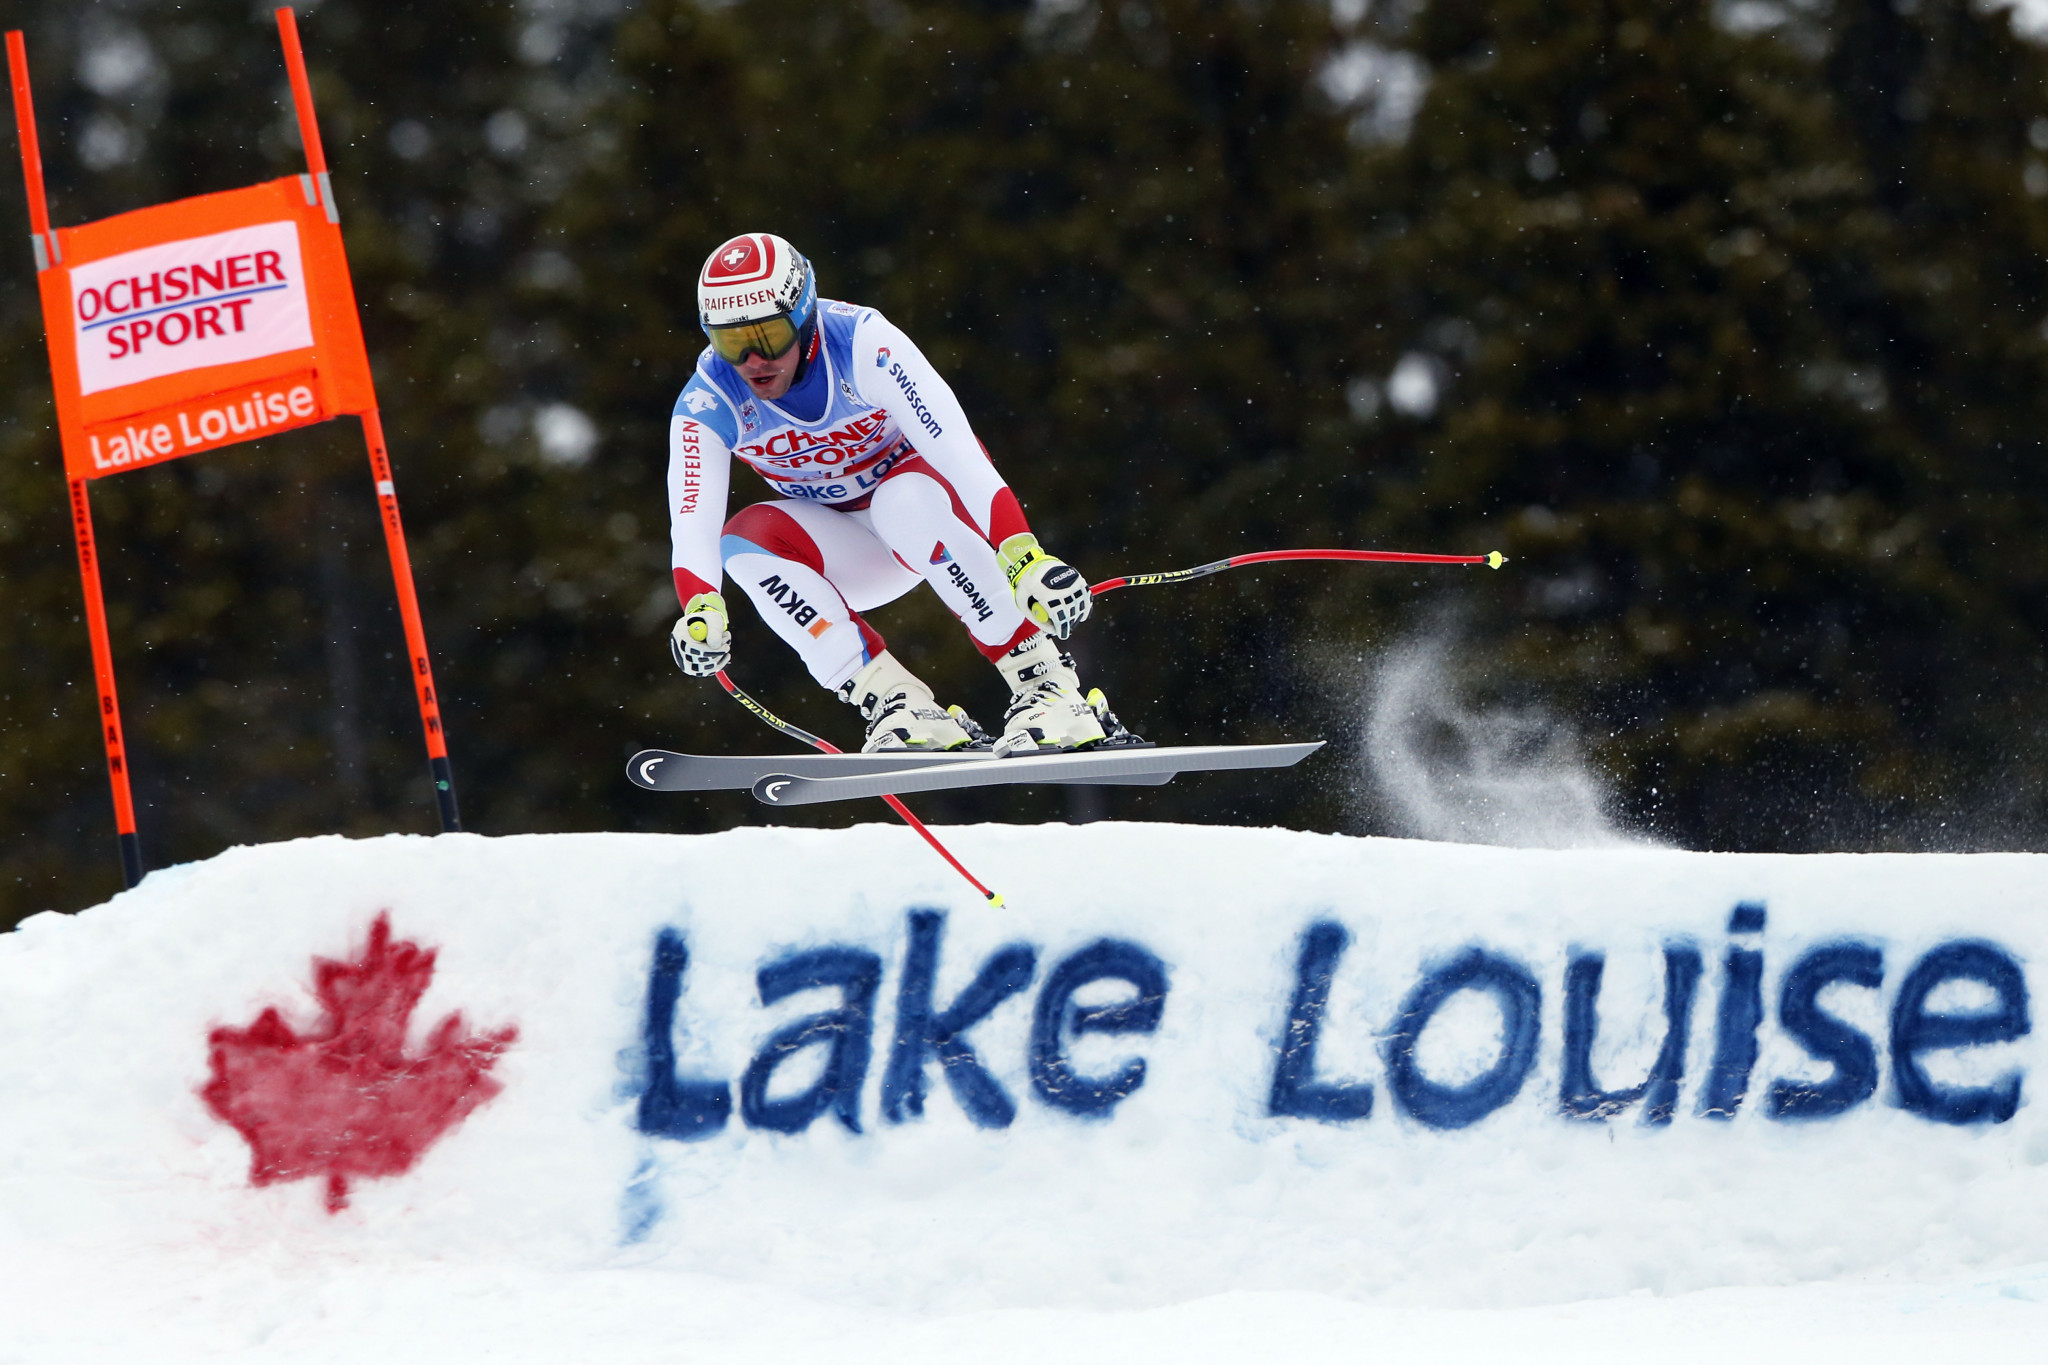 Lake Louise was due to host five FIS Alpine Ski World Cup races later this year ©Getty Images